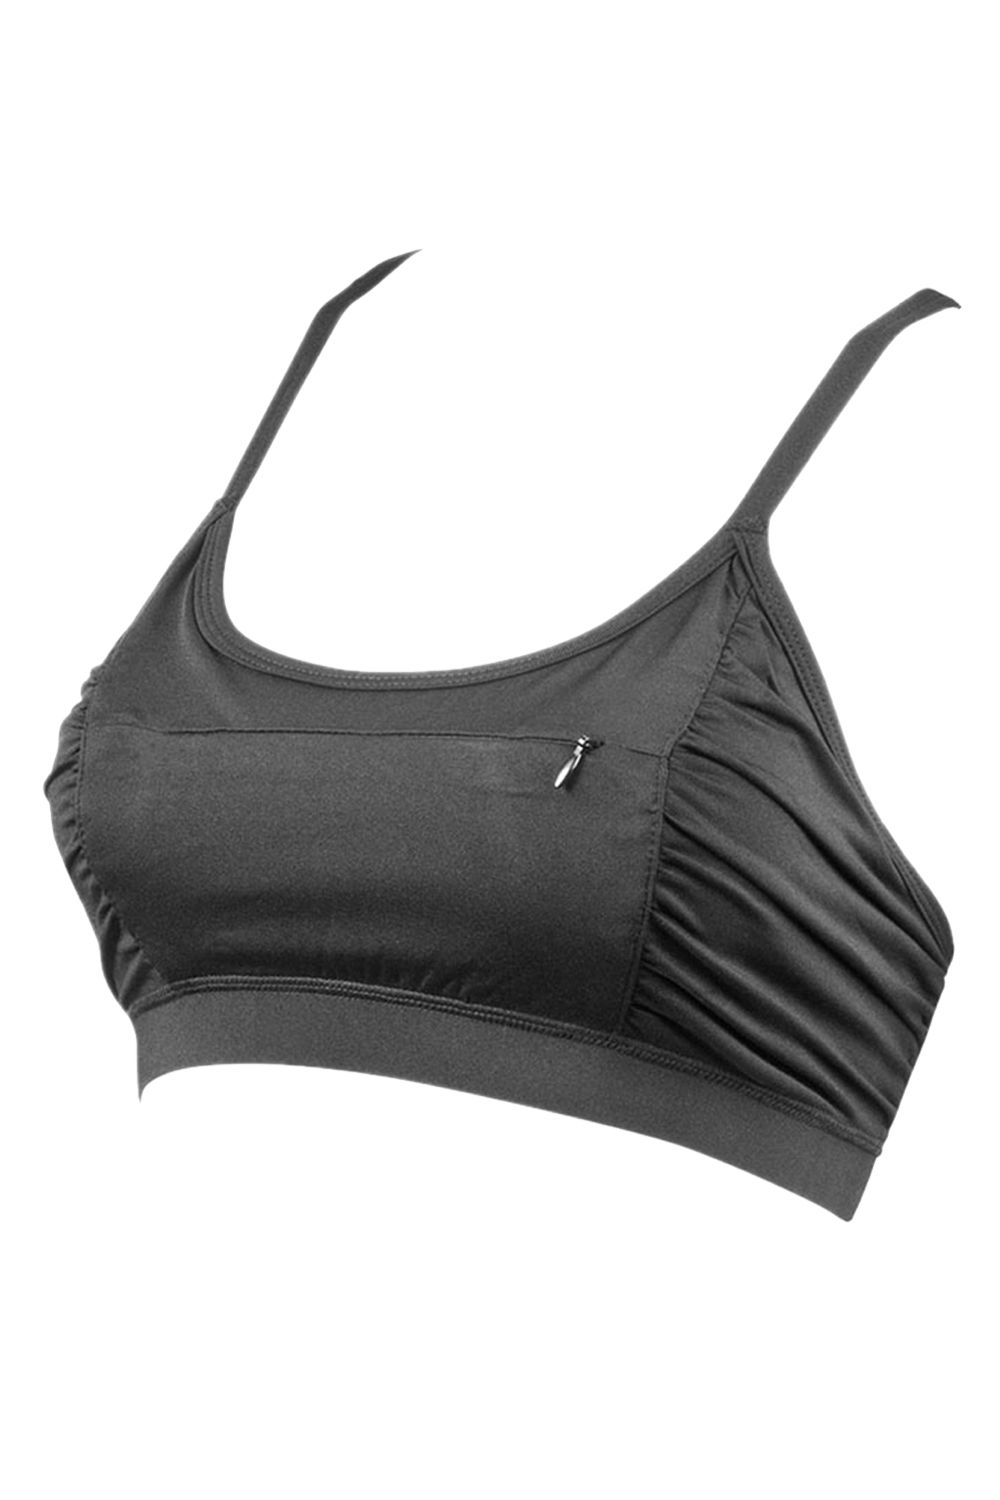 6 Sports Bras with Pockets for Your iPhone - 6 Sports Bras That